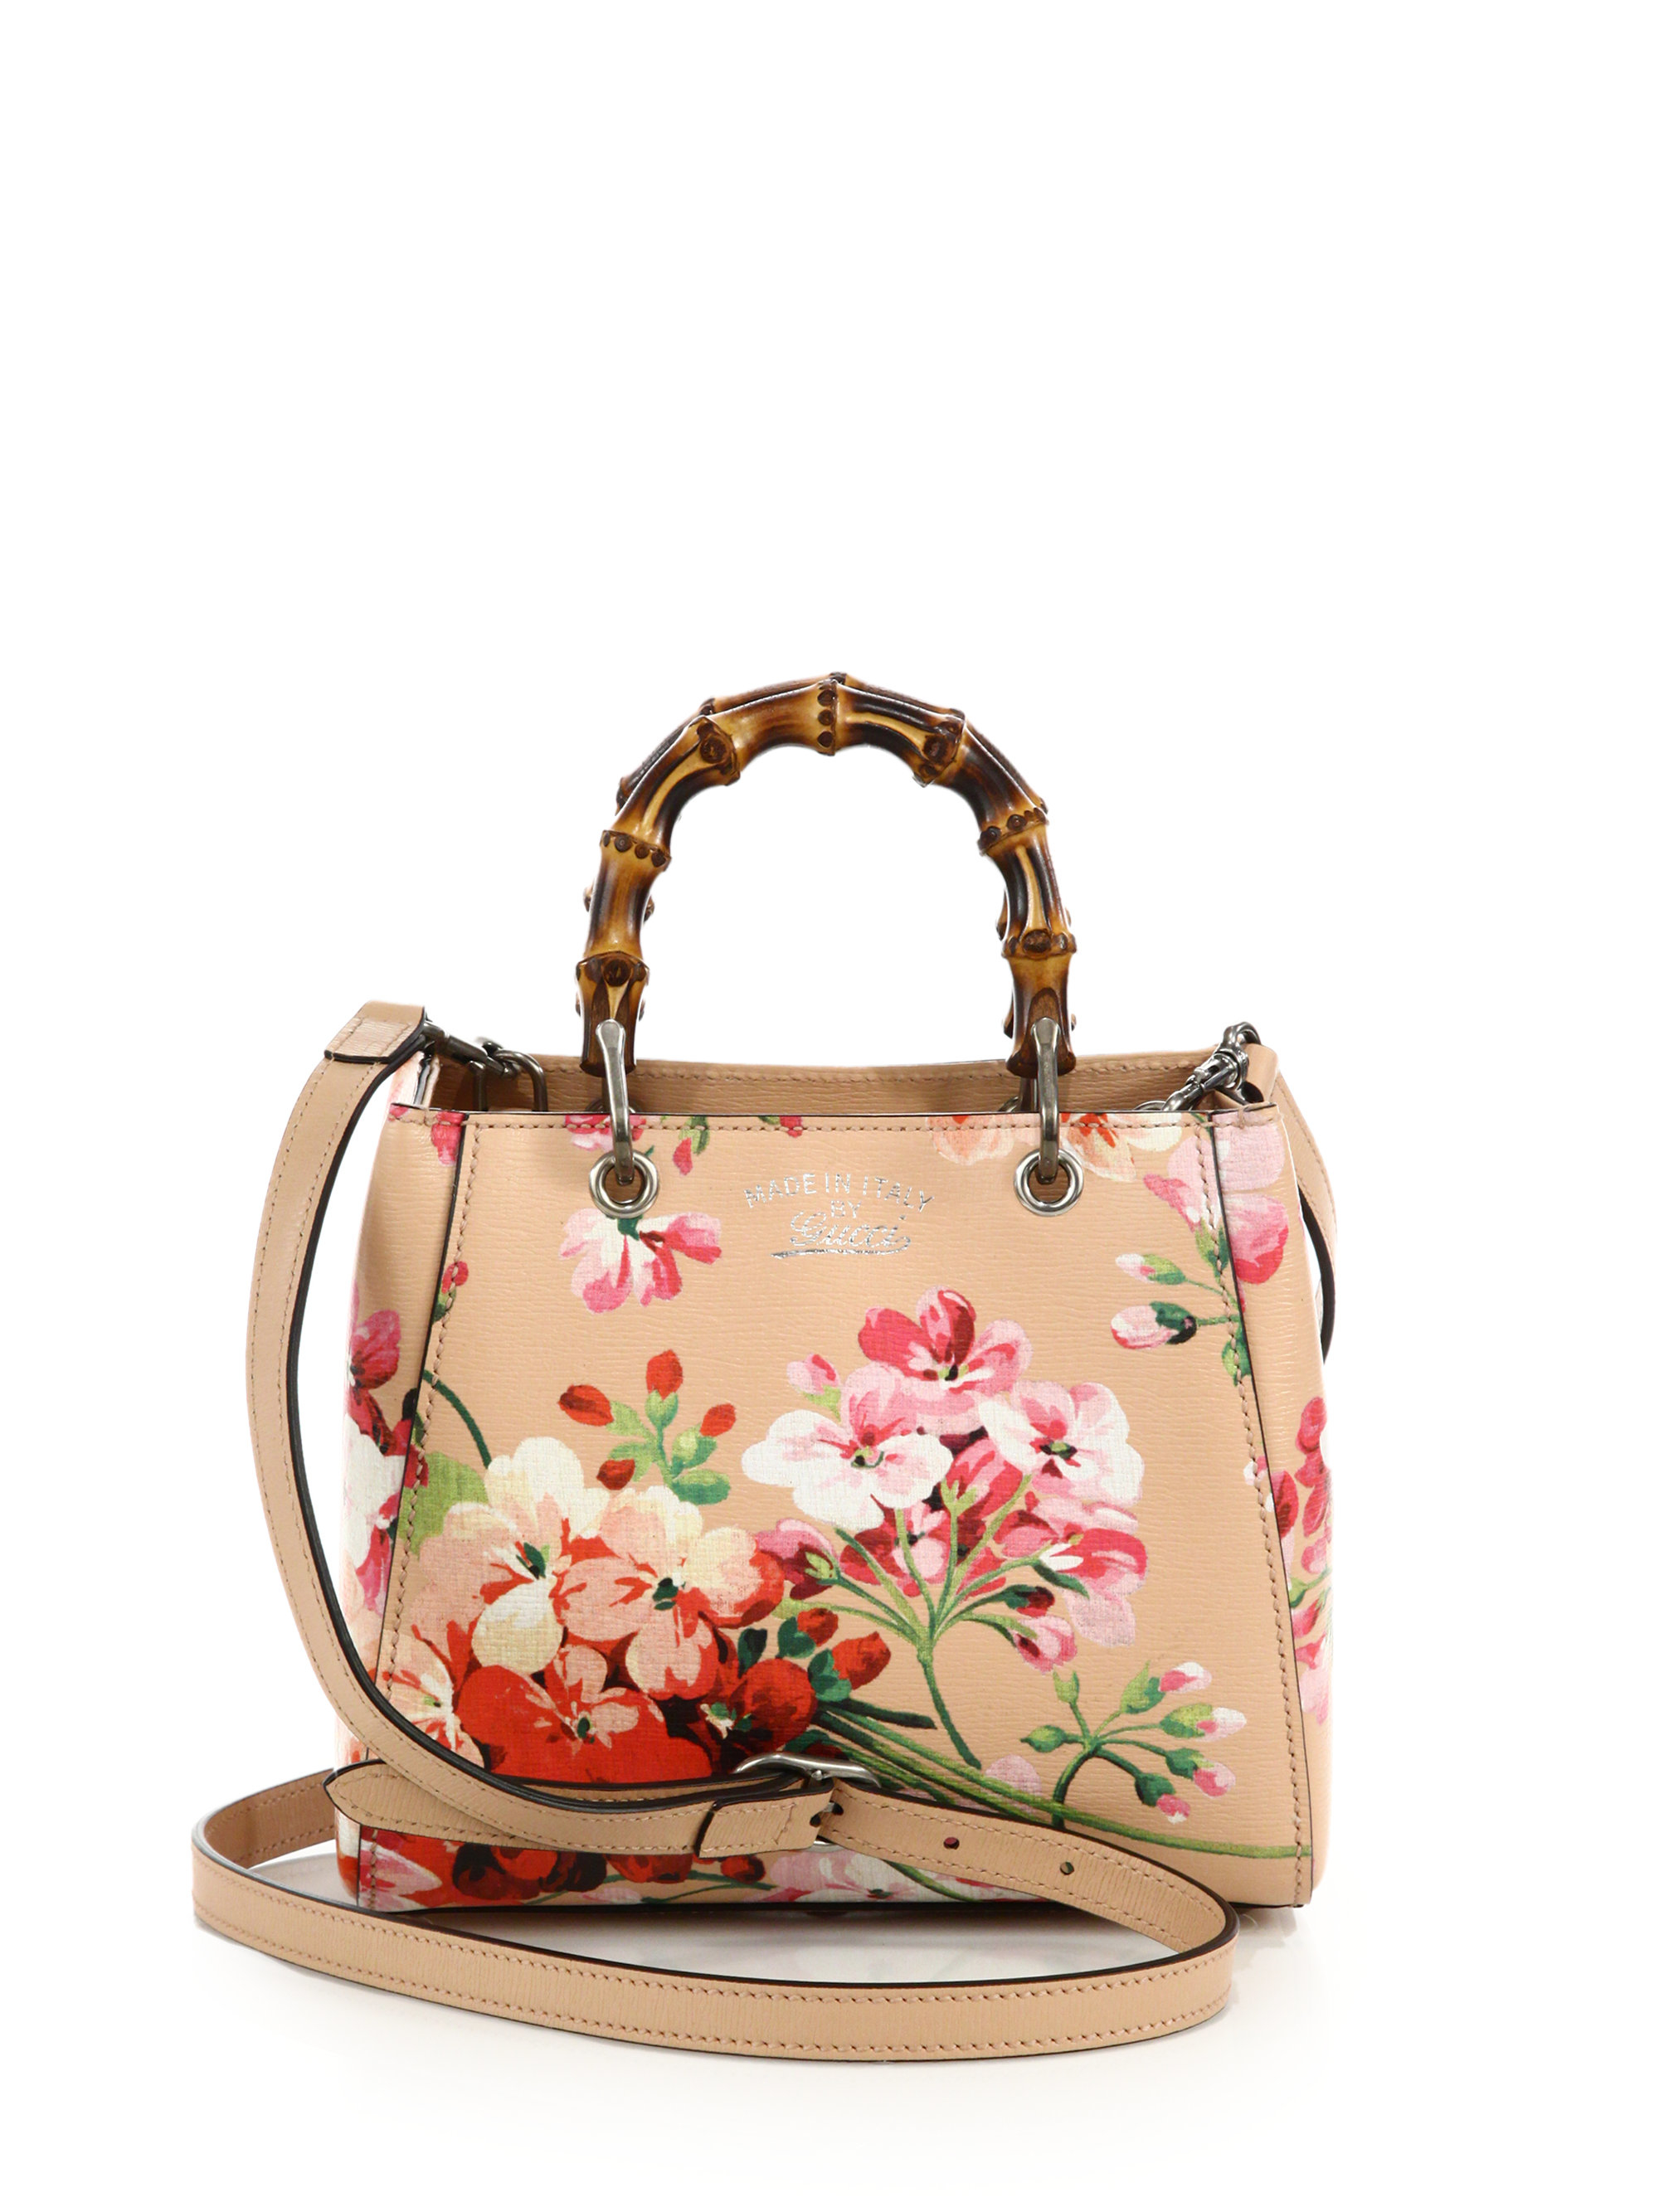 Gucci Bamboo Blooms Mini Leather Shoulder Bag | Lyst